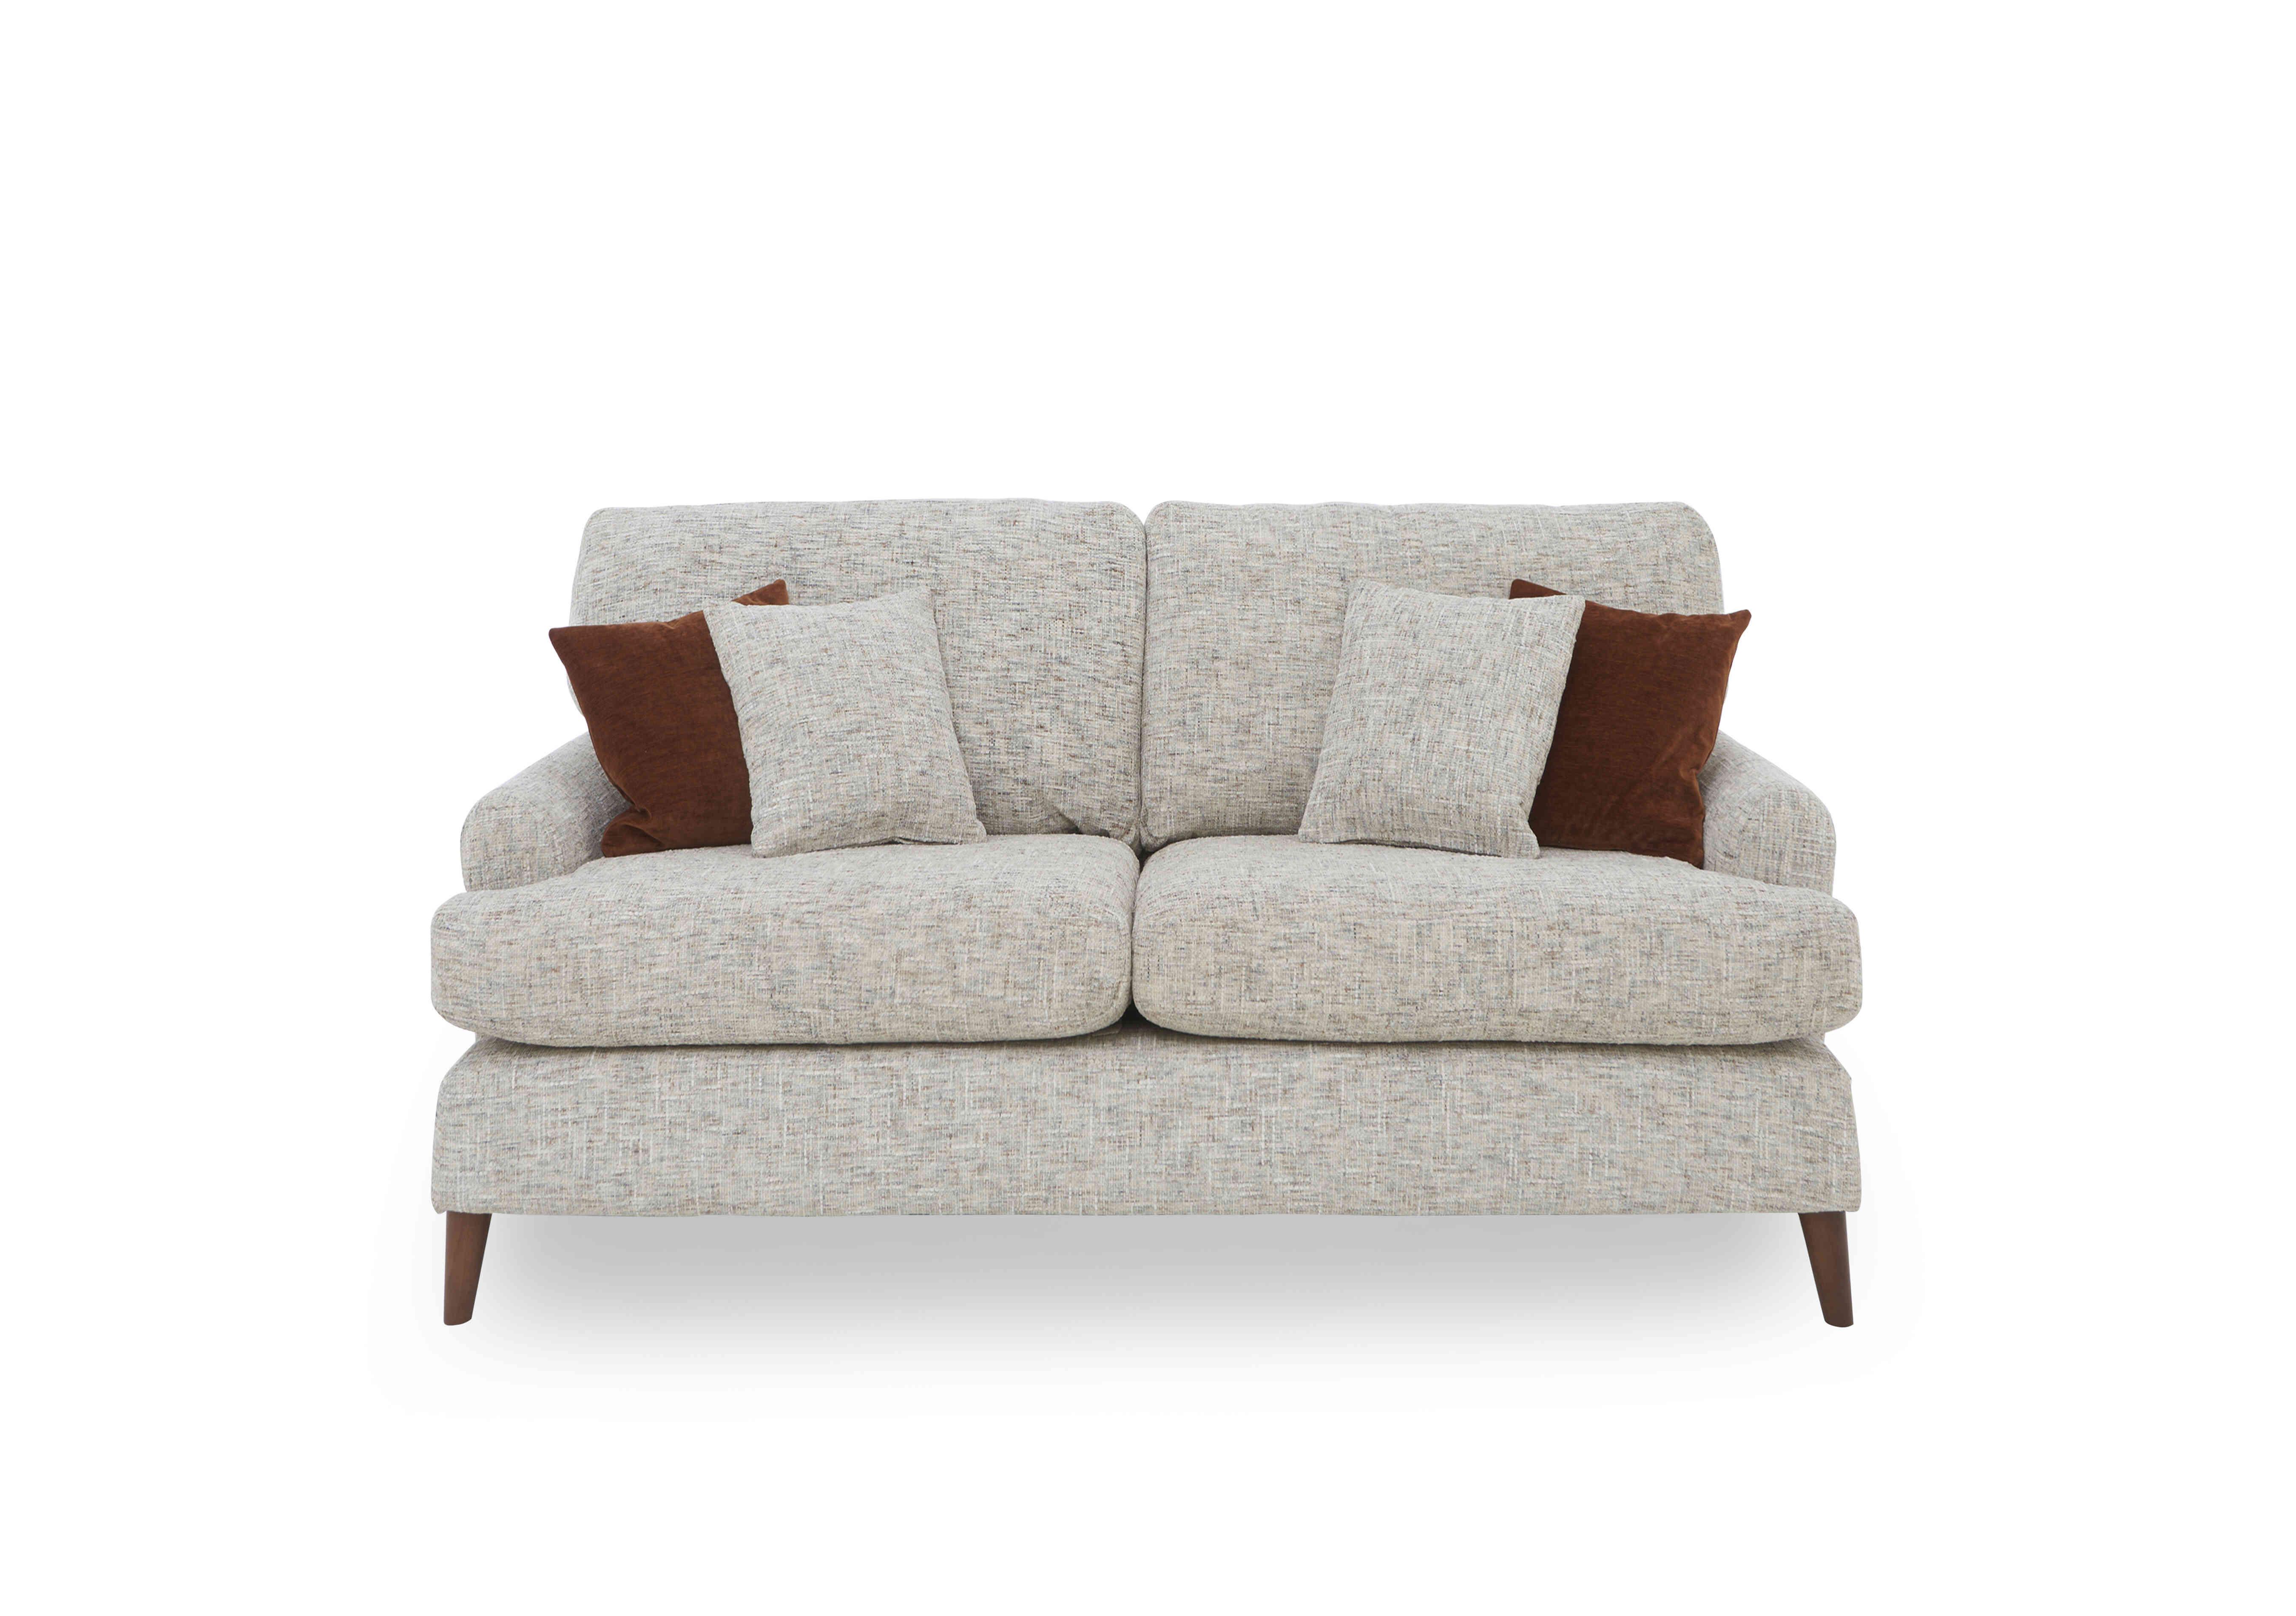 Jackson 2 Seater Fabric Sofa in Frost on Furniture Village